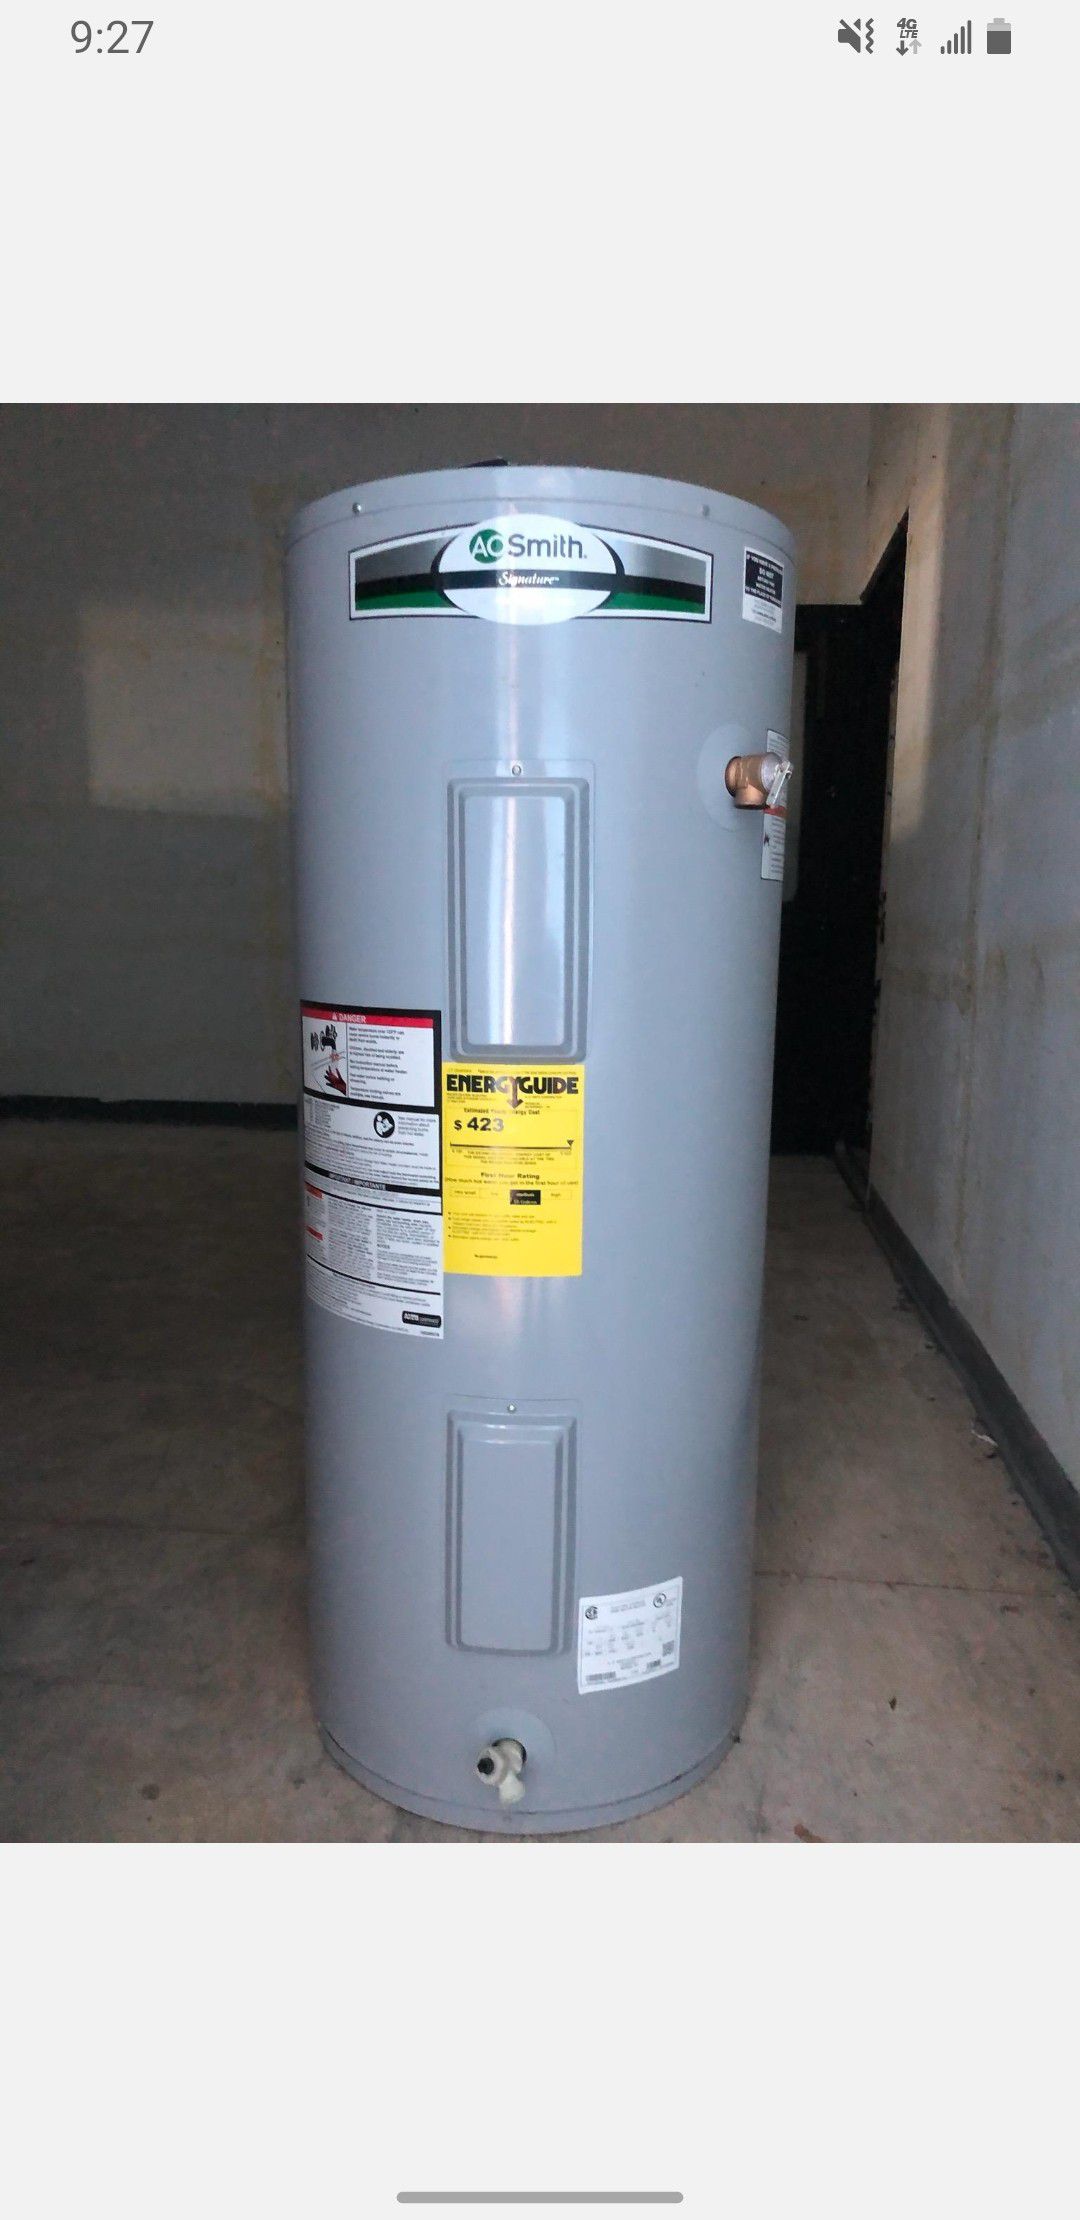 Electrical water heater 220v 40 gallons